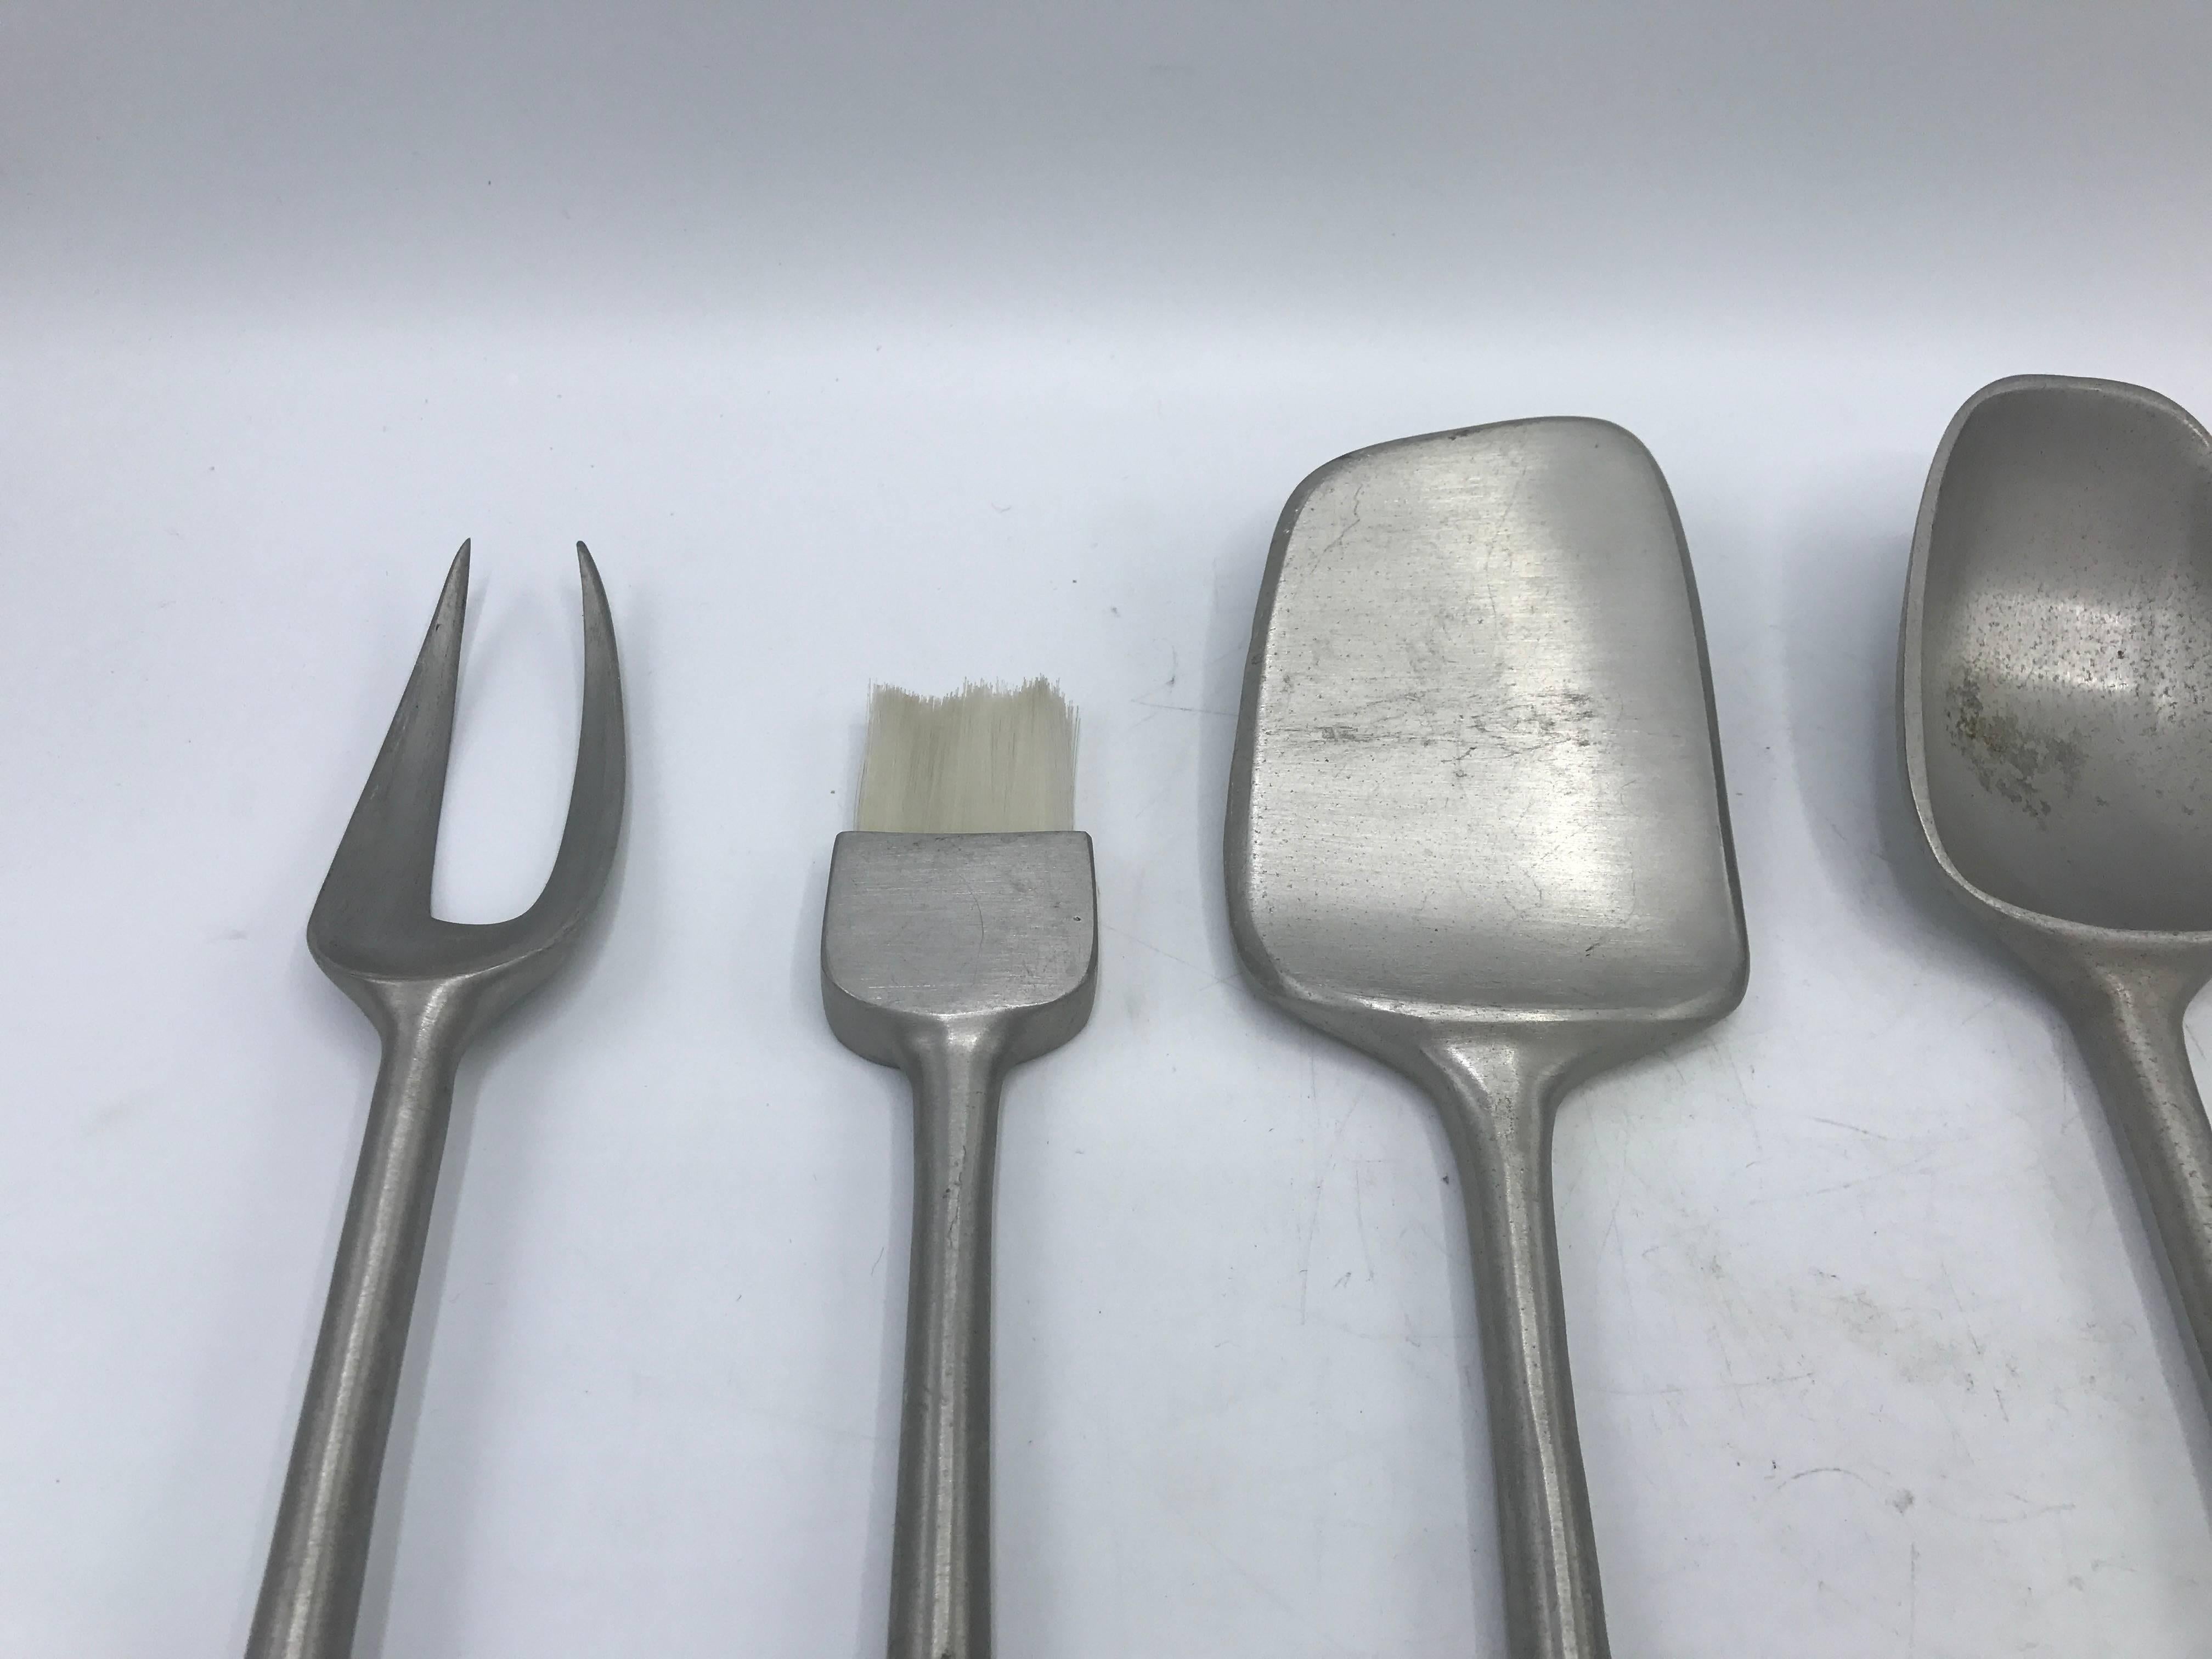 Offered is a fabulous, set of five, 1960s Mid-Century Modern teak and aluminum grill tools. Looks as if the set has never been used.